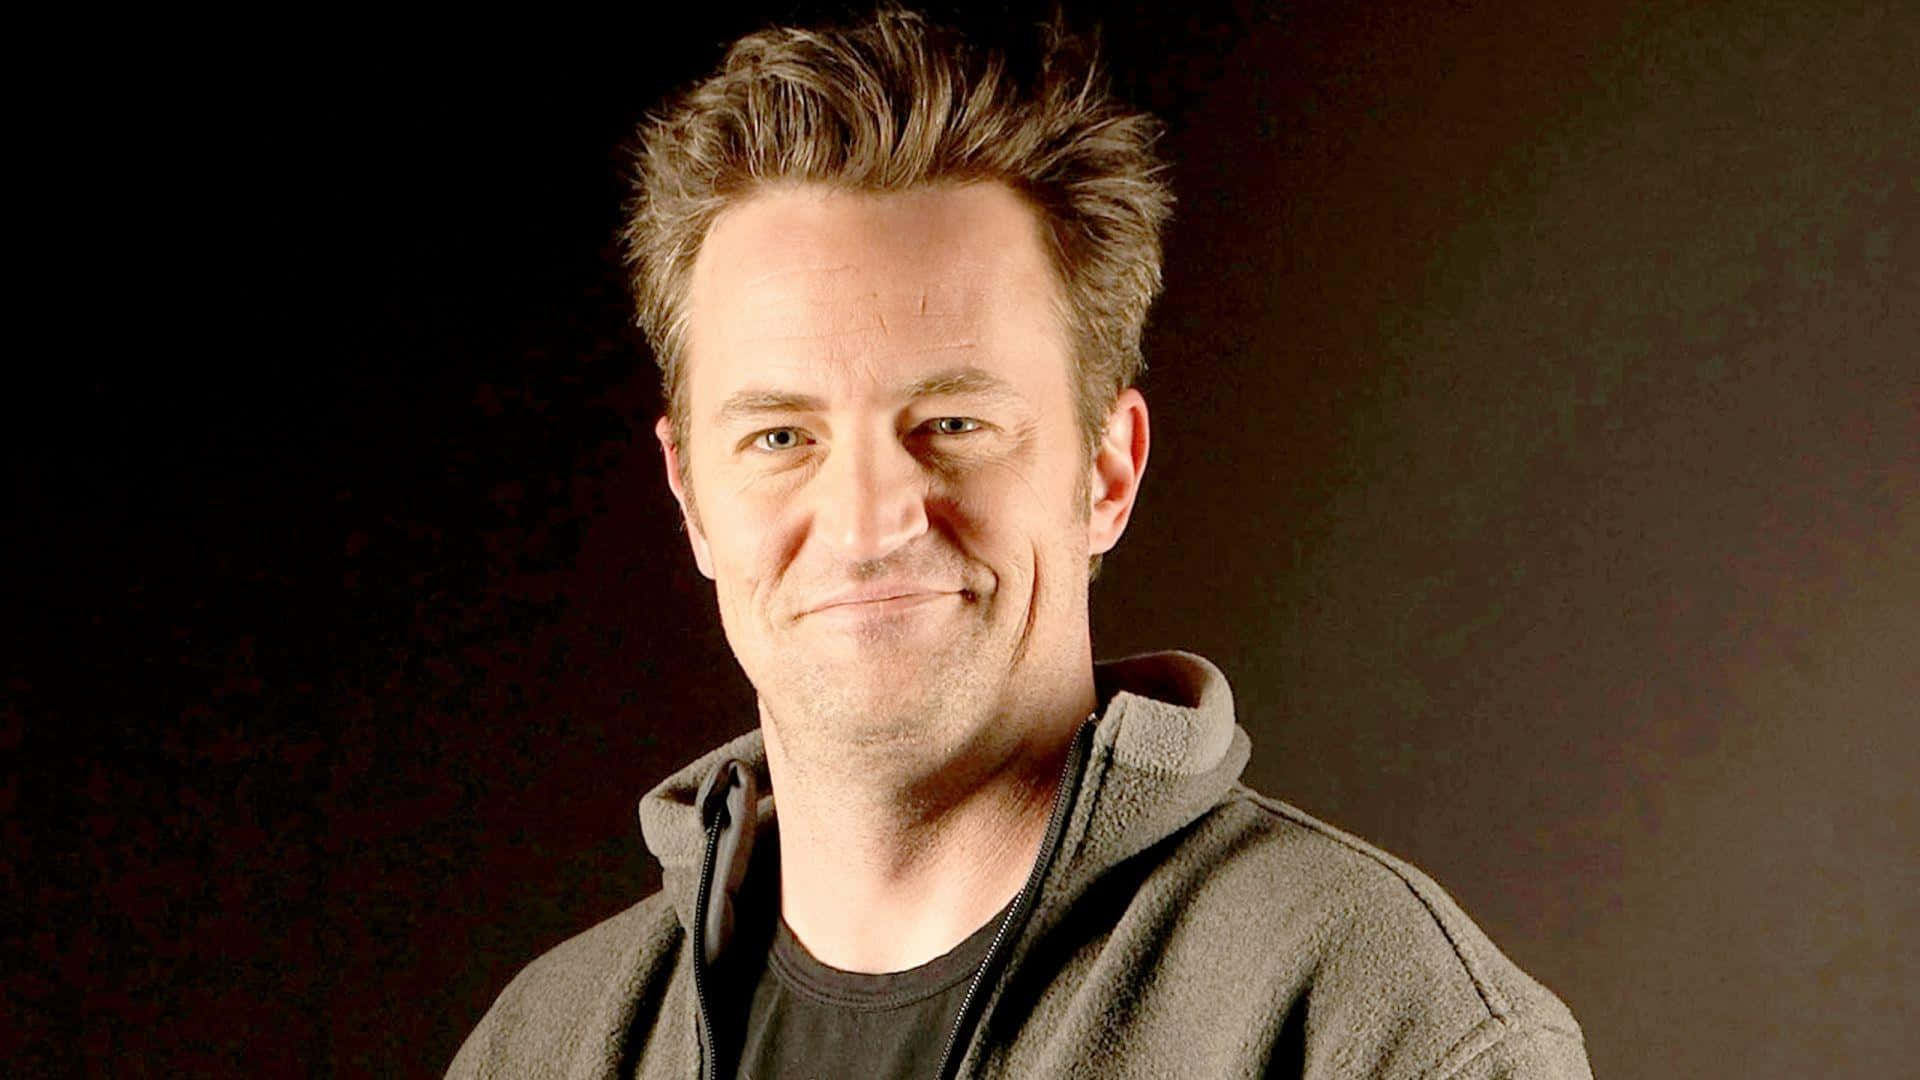 Actor Matthew Perry photographed in His Engaging Yet Refined Style Wallpaper